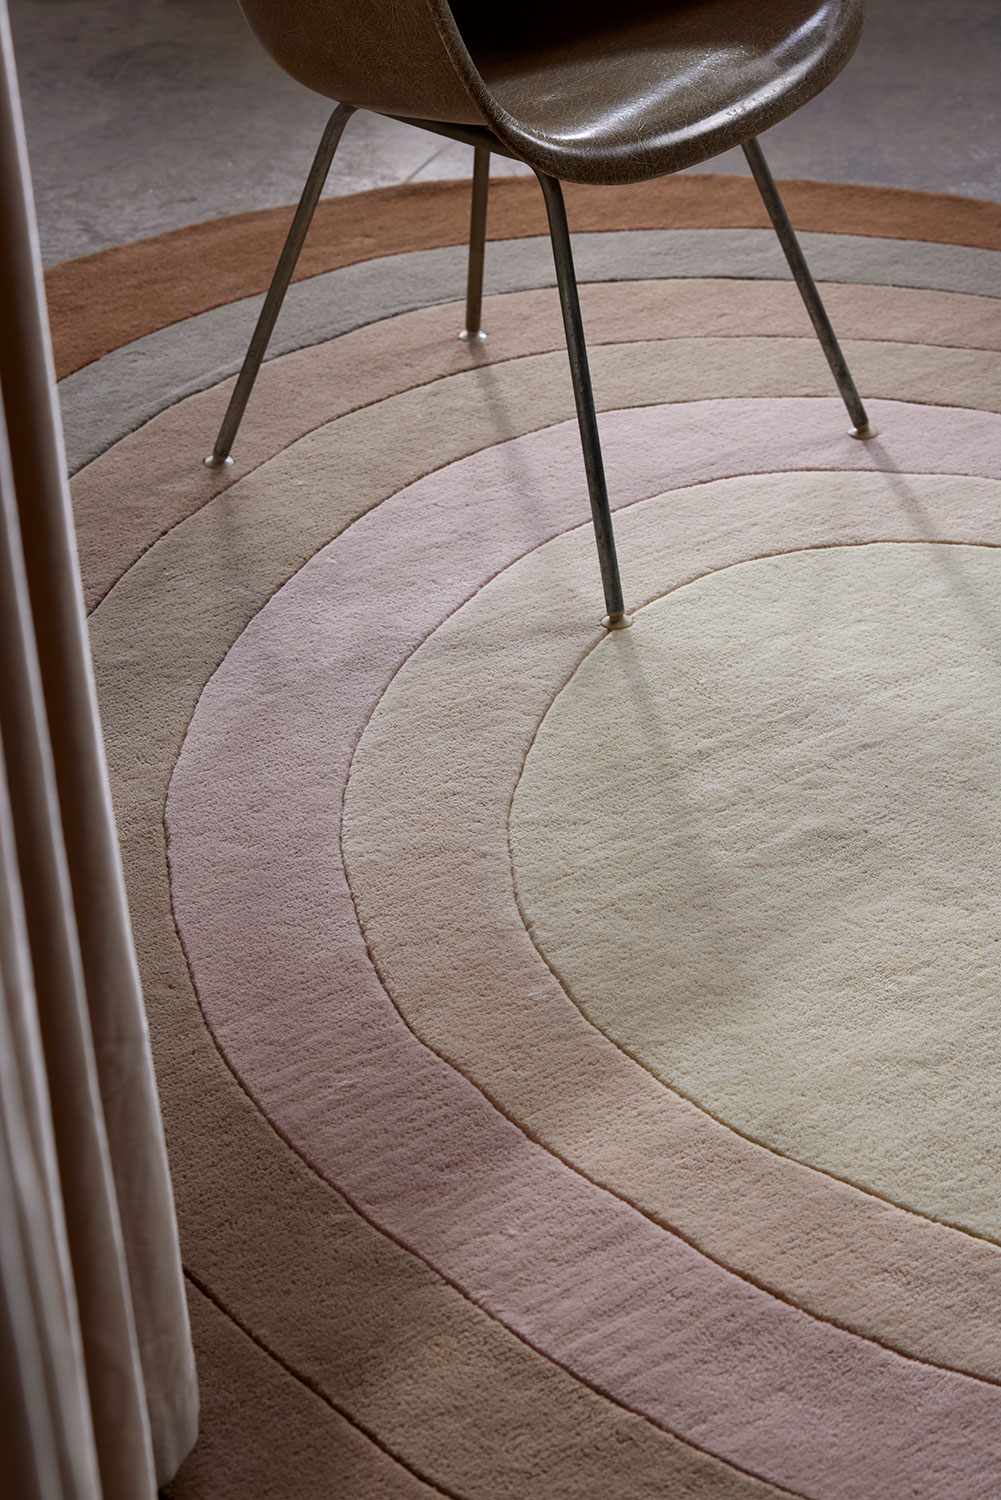 A chair sits on a neutral gradient area rug called Pool Heaven in the shape of a pool